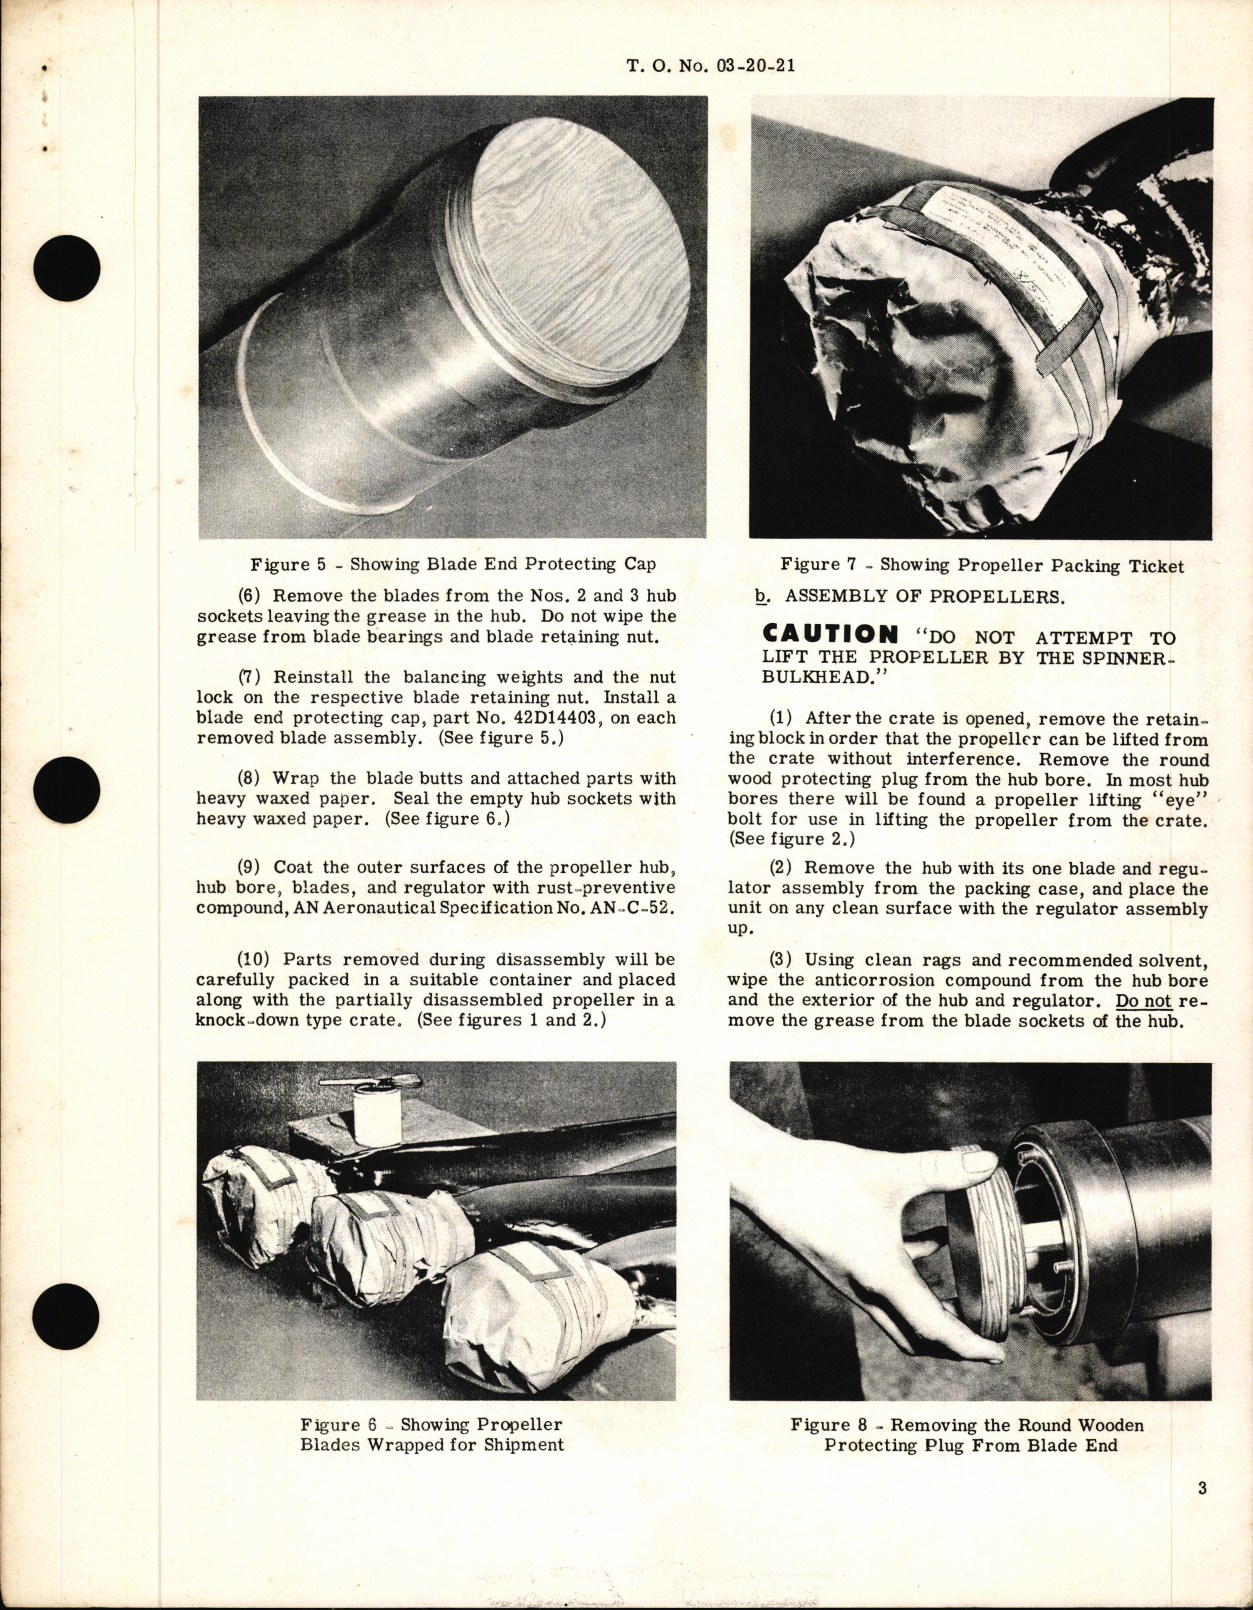 Sample page 3 from AirCorps Library document: Propellers and Accessories - Shipment of Disassembled Propellers 